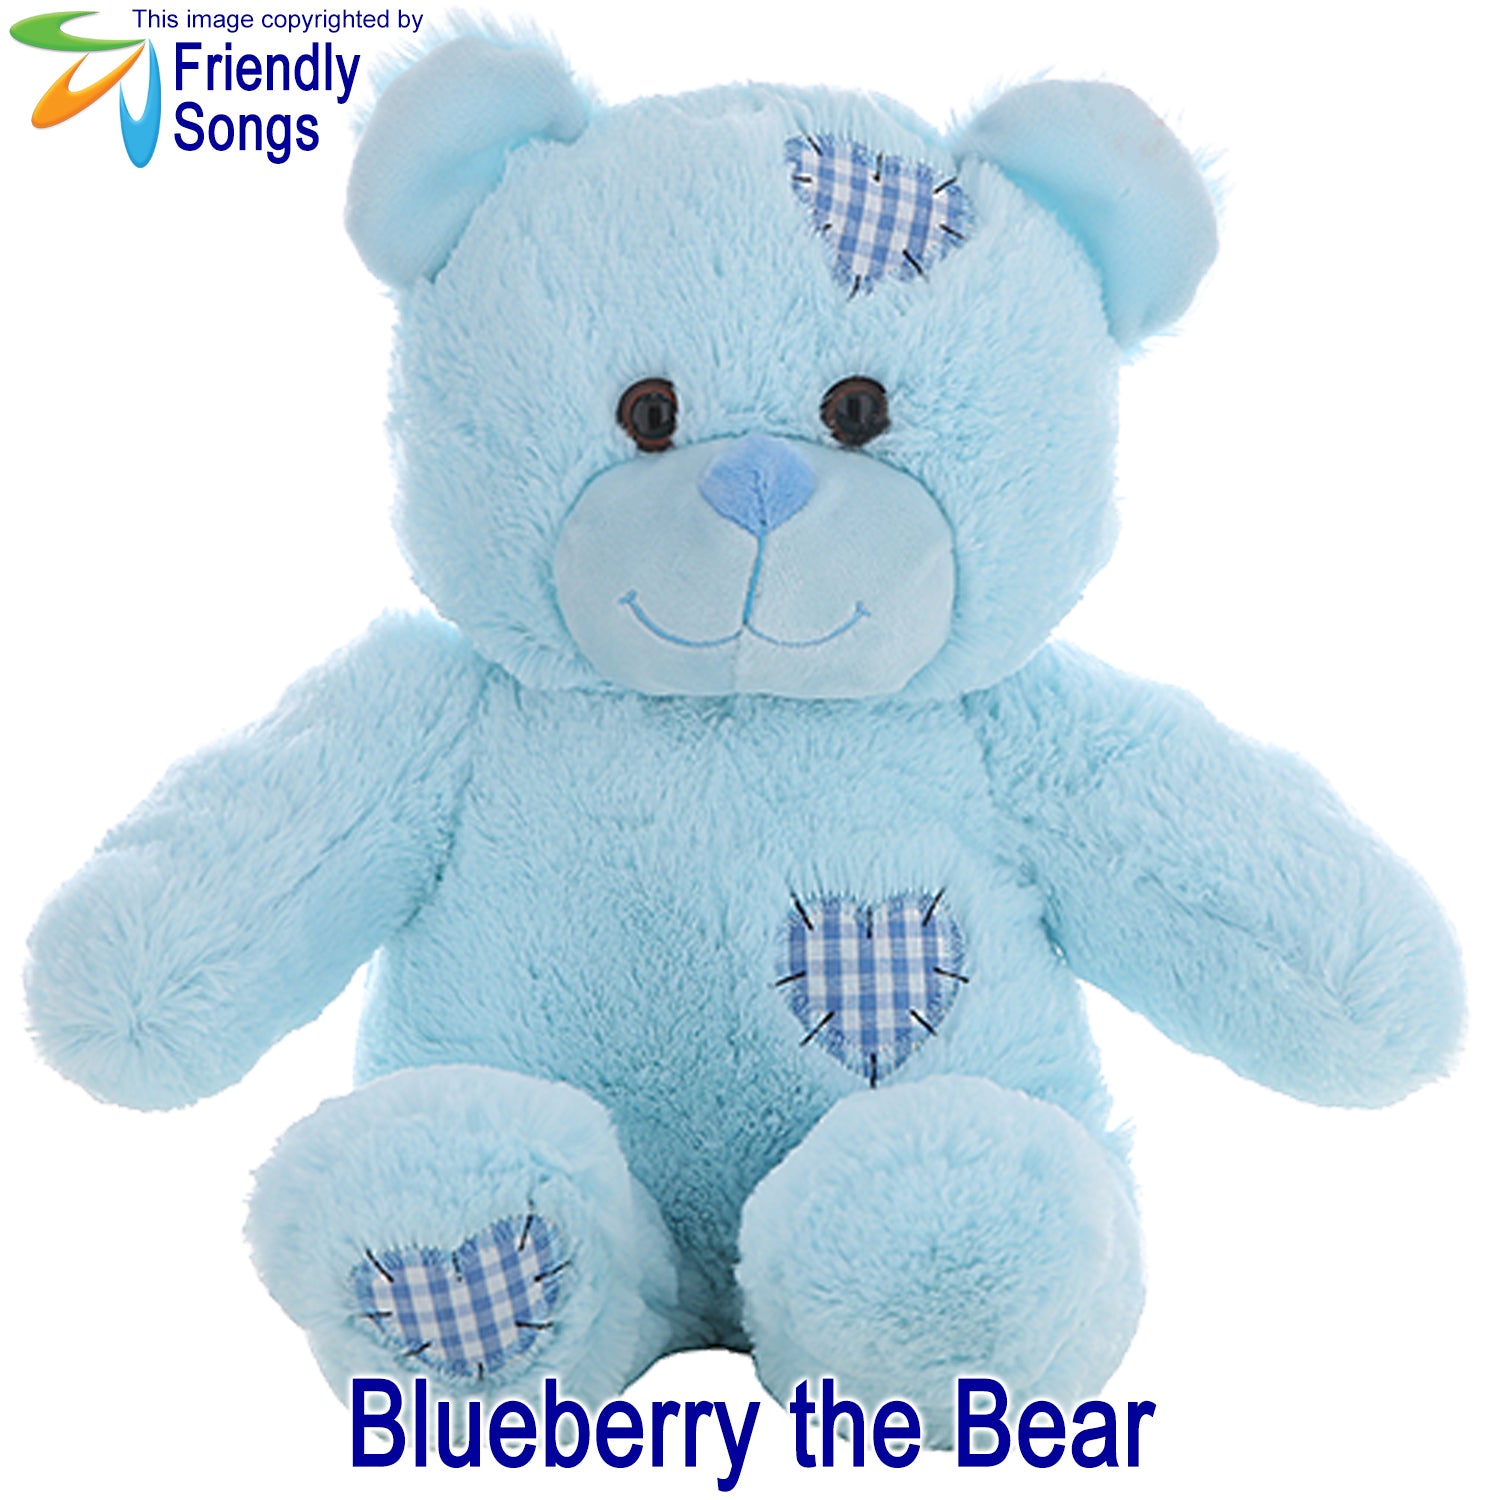 Personalized Stuffed Animal Plush with your Baby's Heartbeat (or your Favorite Song) inside!